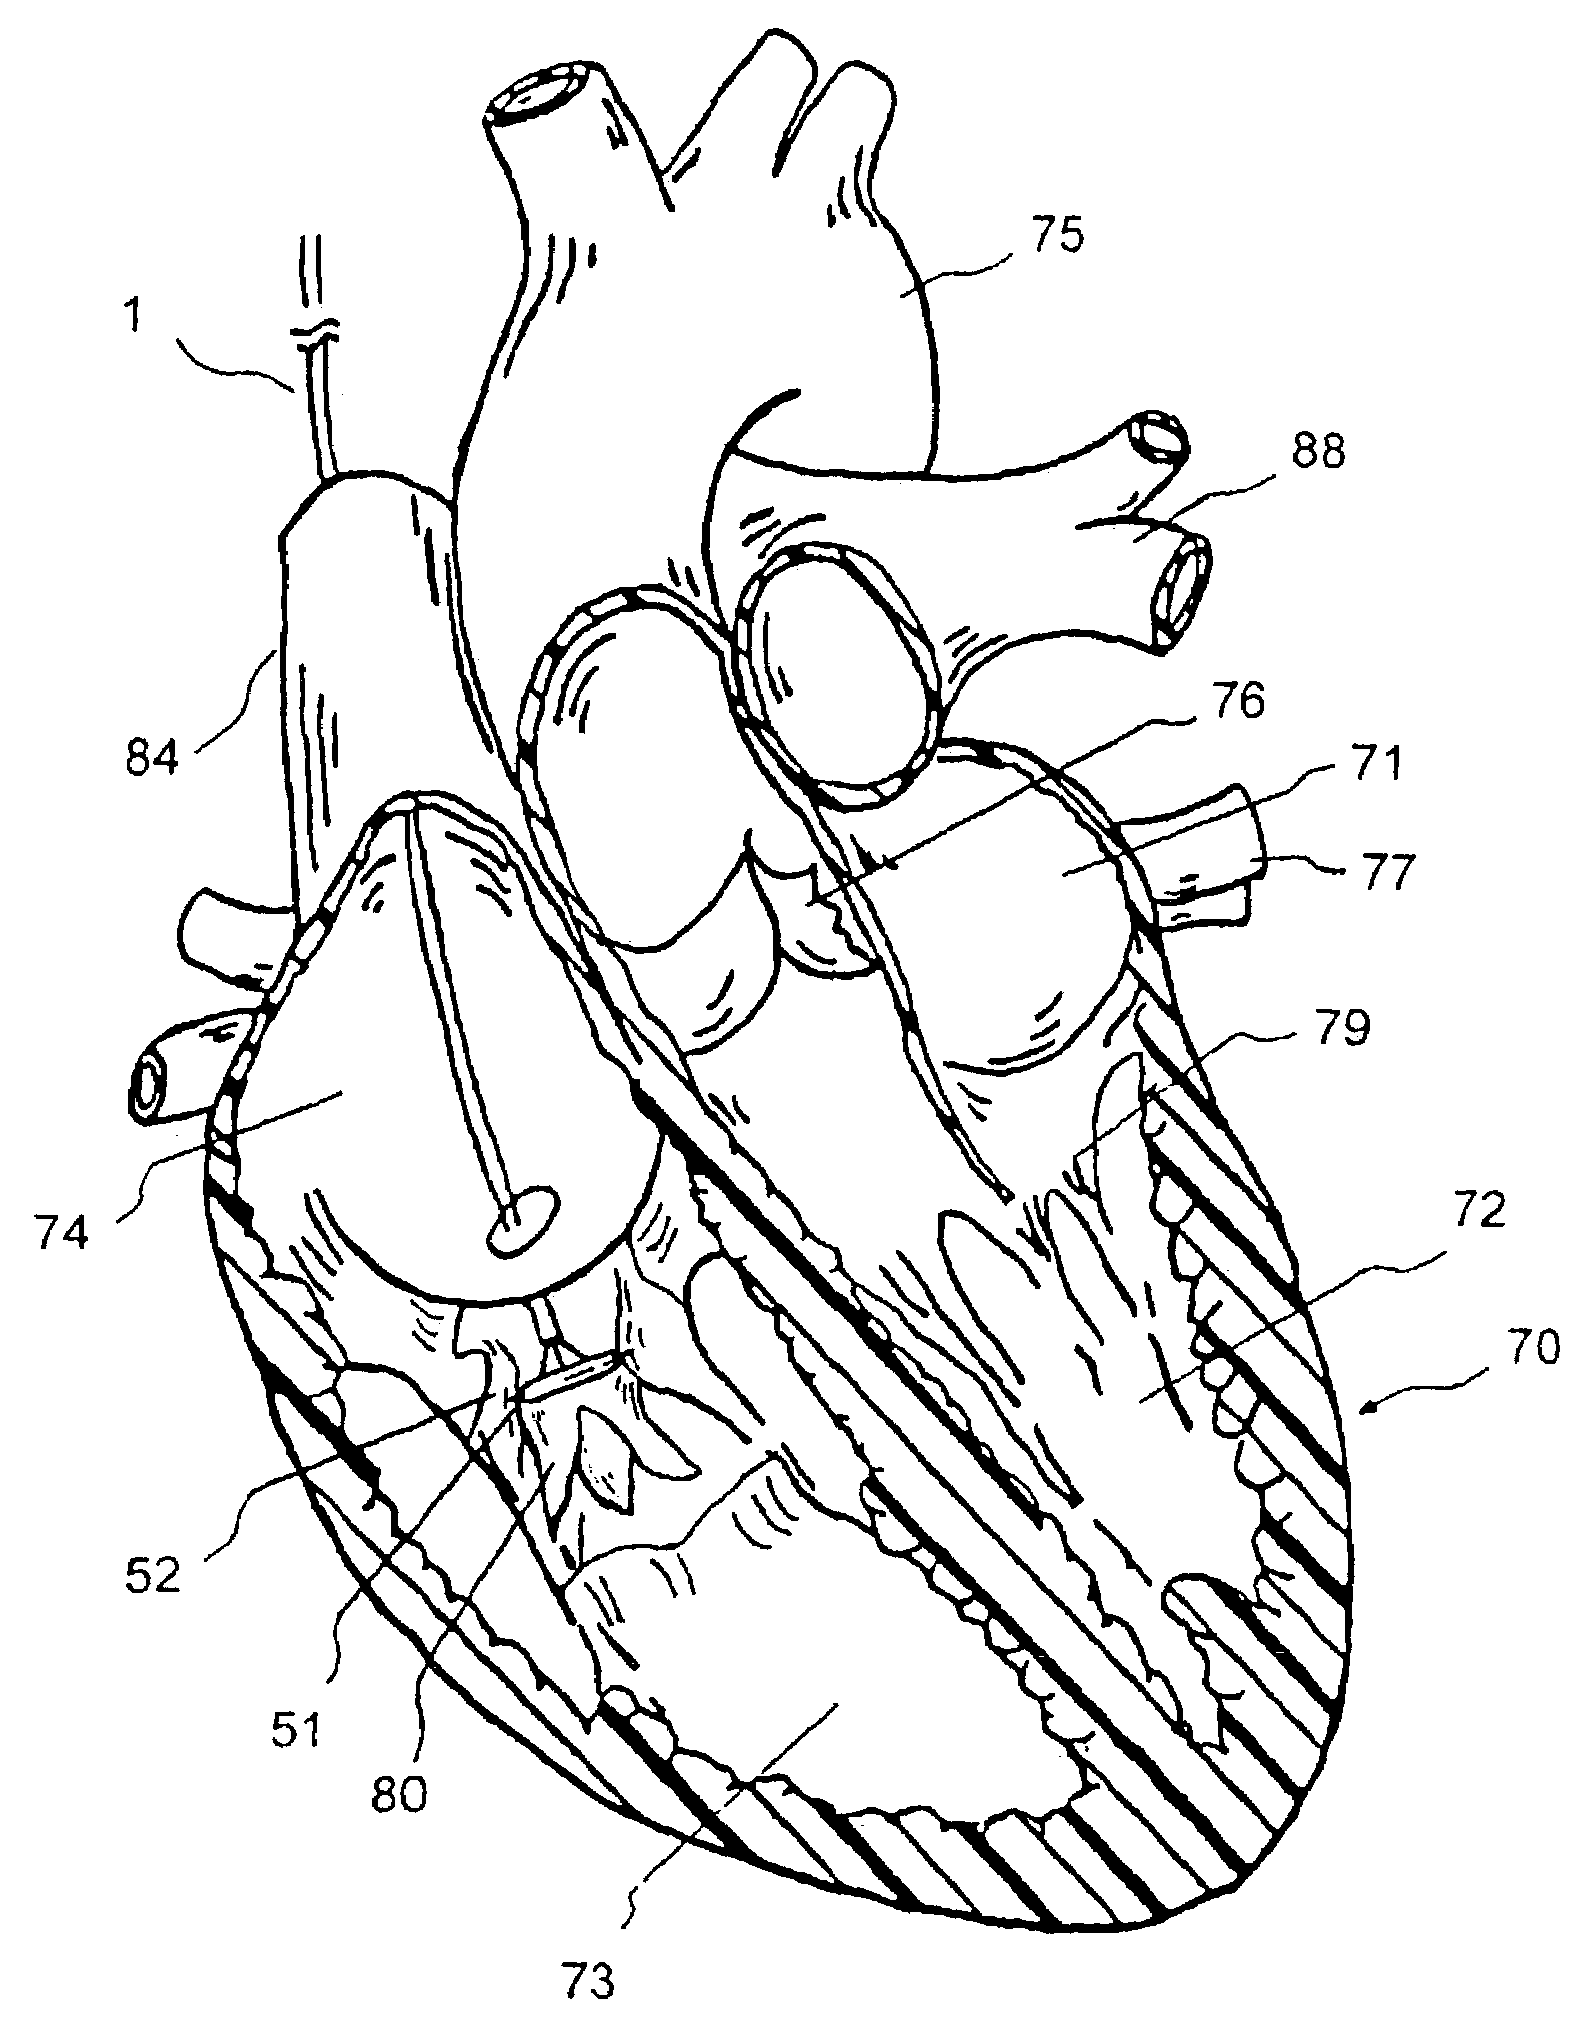 Methods for treating and repairing mitral valve annulus